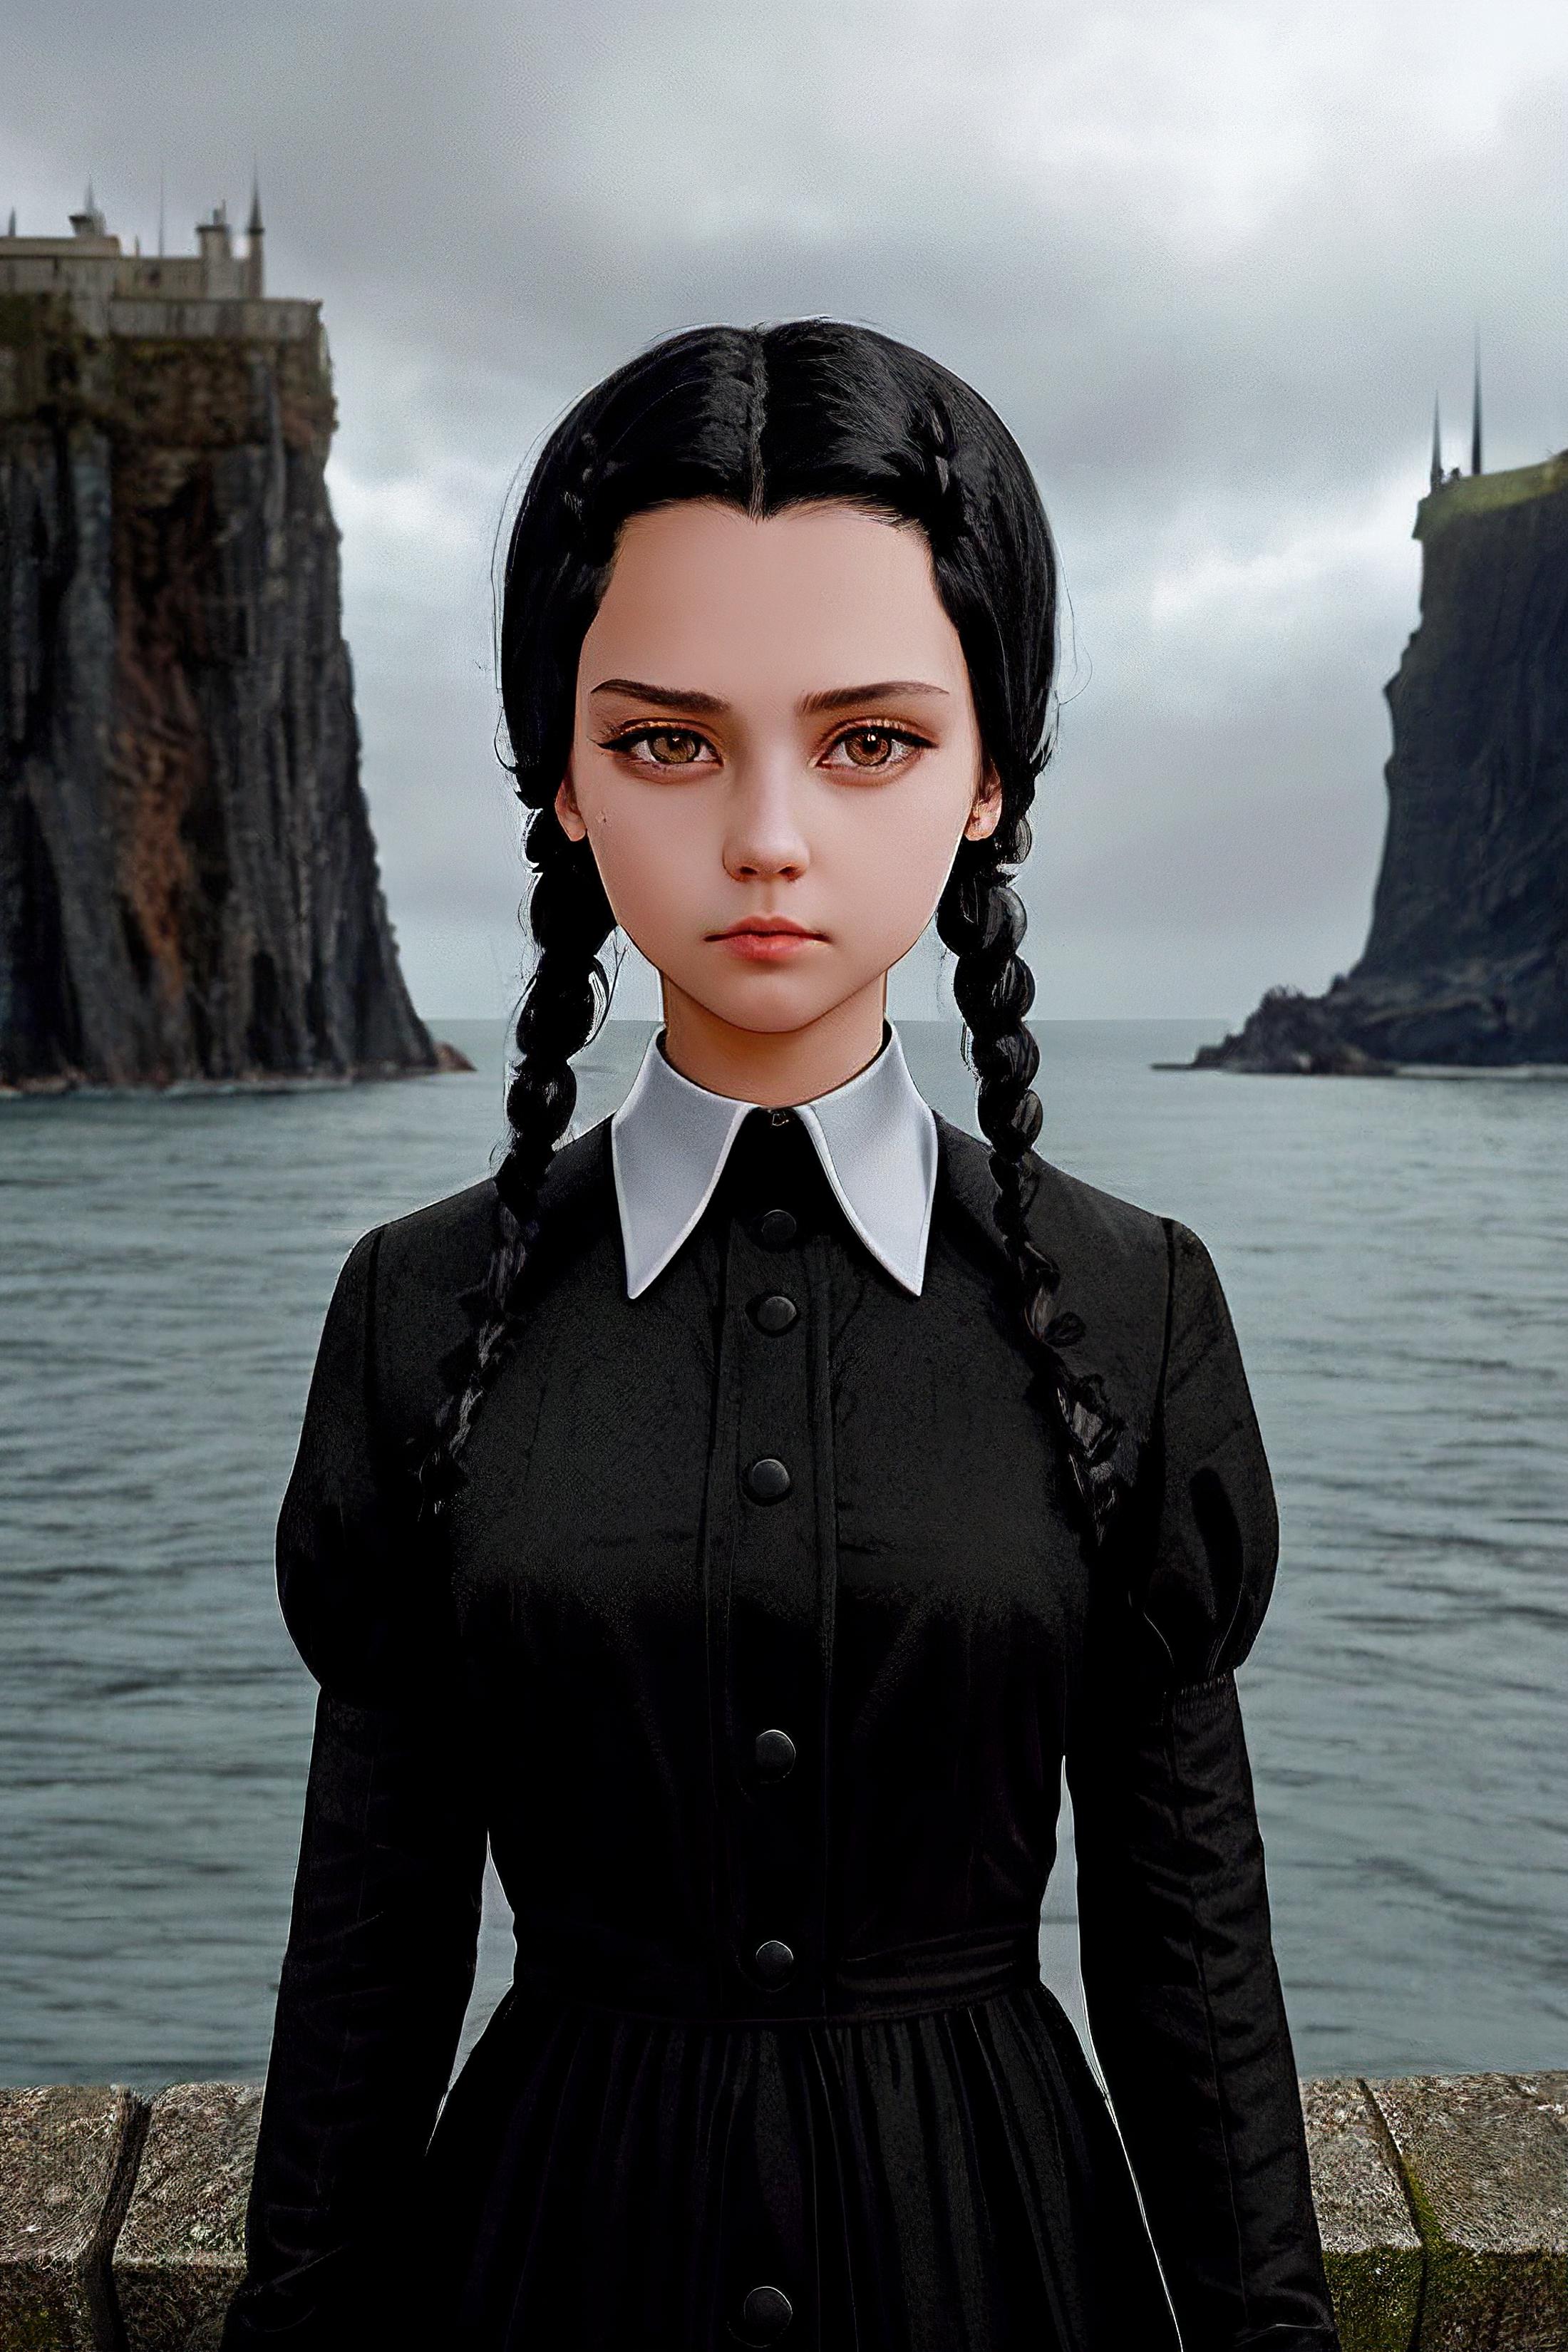 Wednesday Addams | 1990's image by _ABC_